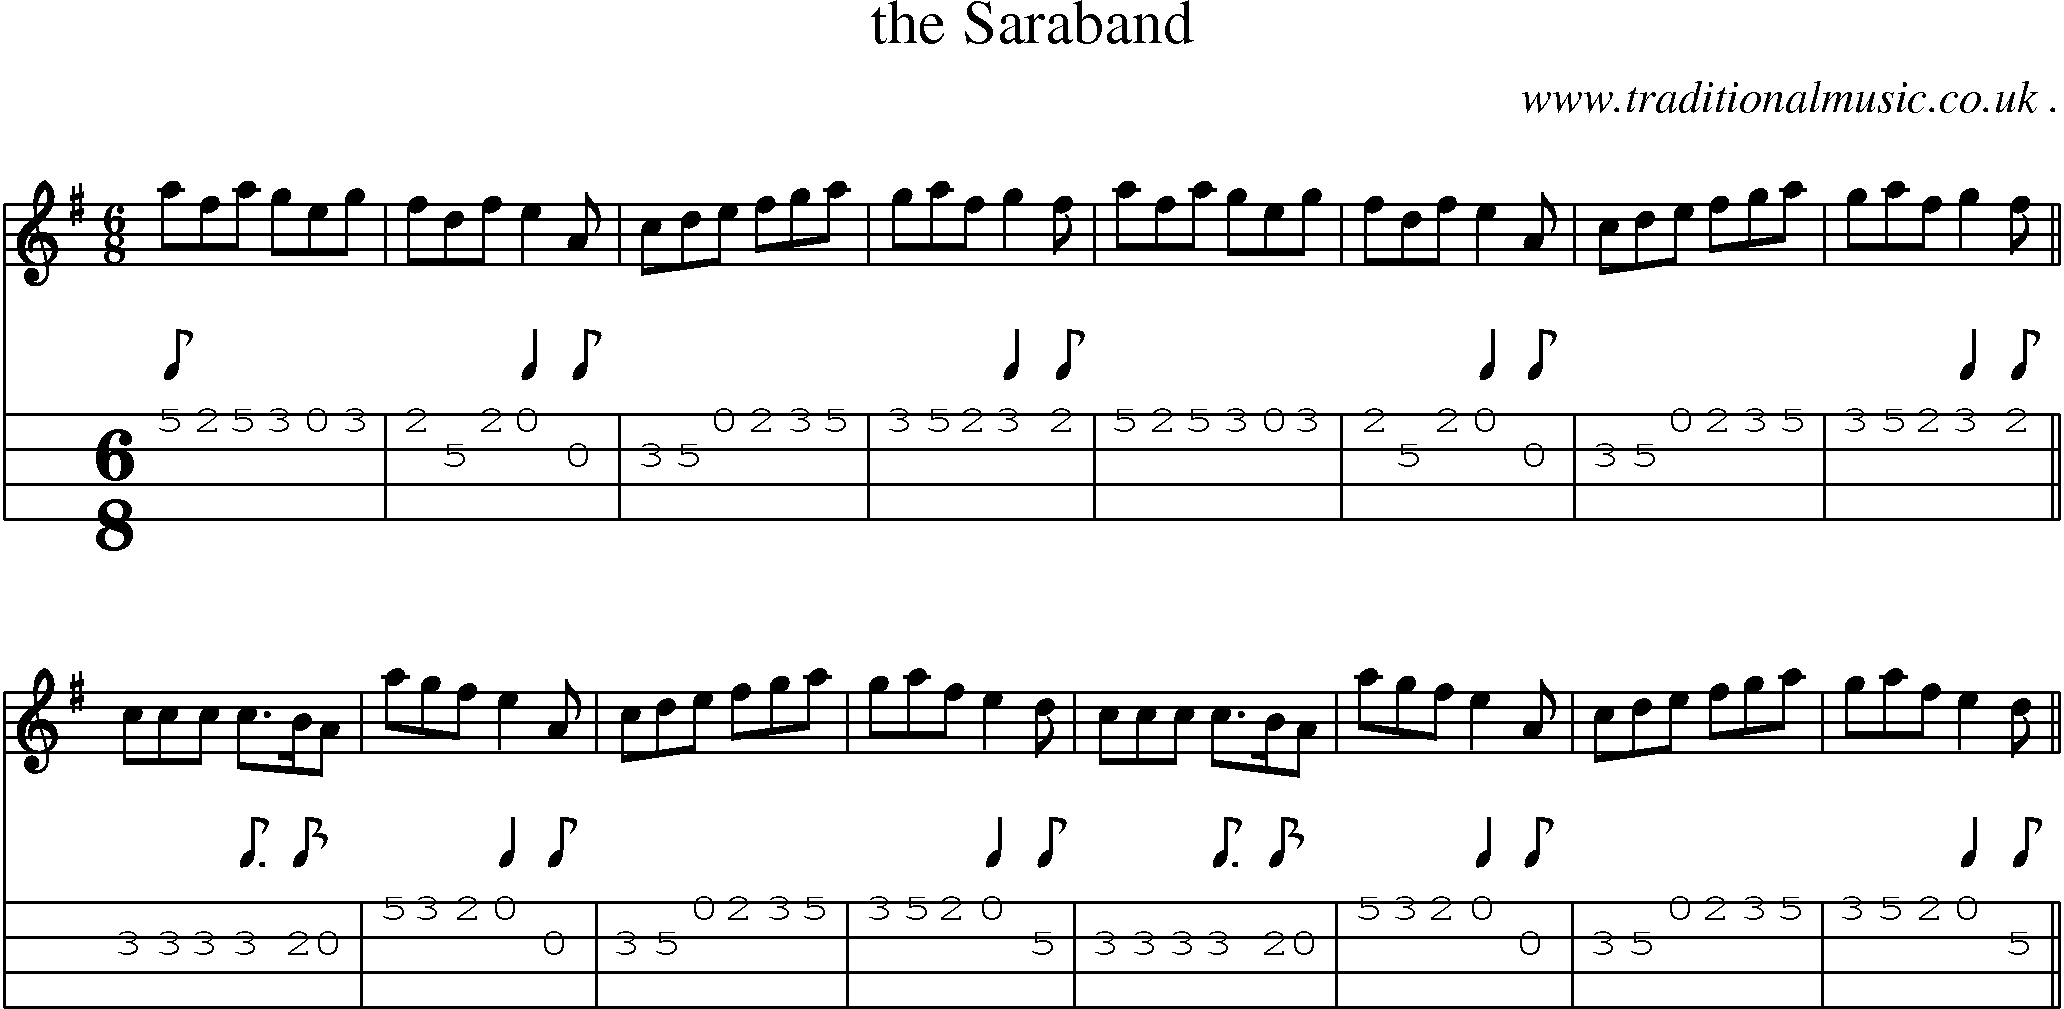 Sheet-music  score, Chords and Mandolin Tabs for The Saraband